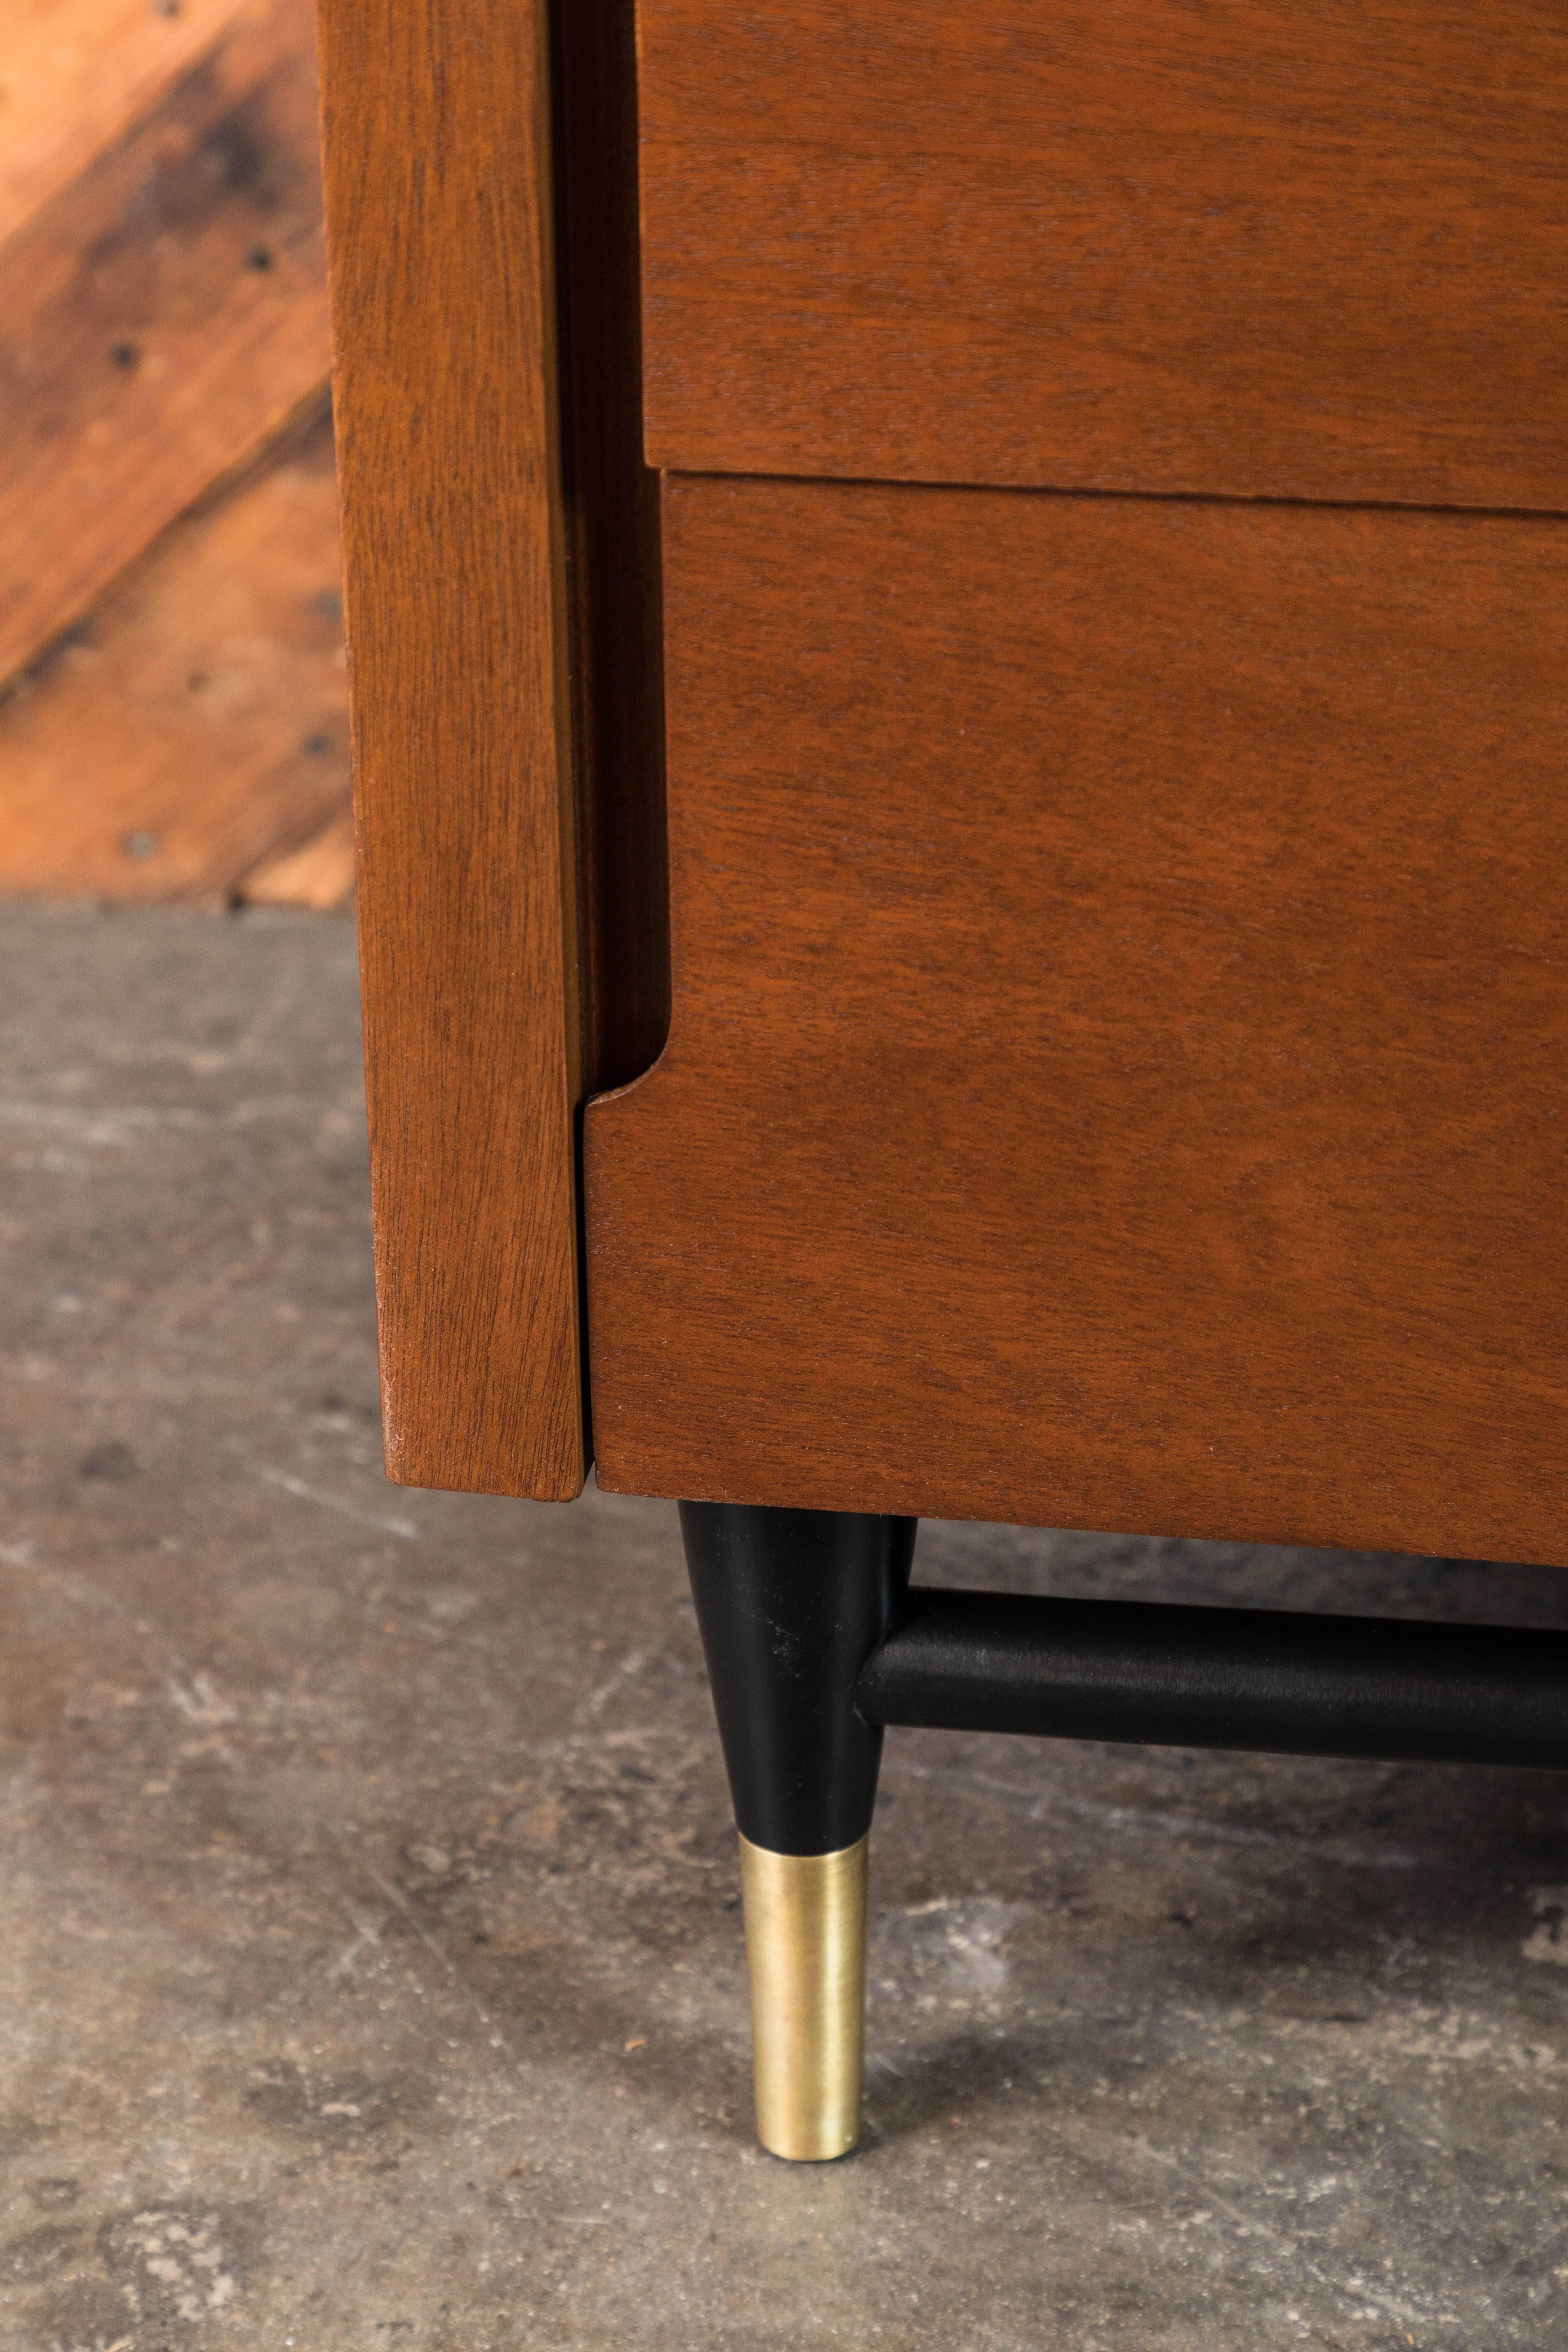 American Midcentury Refinished and Lacquered Small Dressers with Brass Details, Pair For Sale